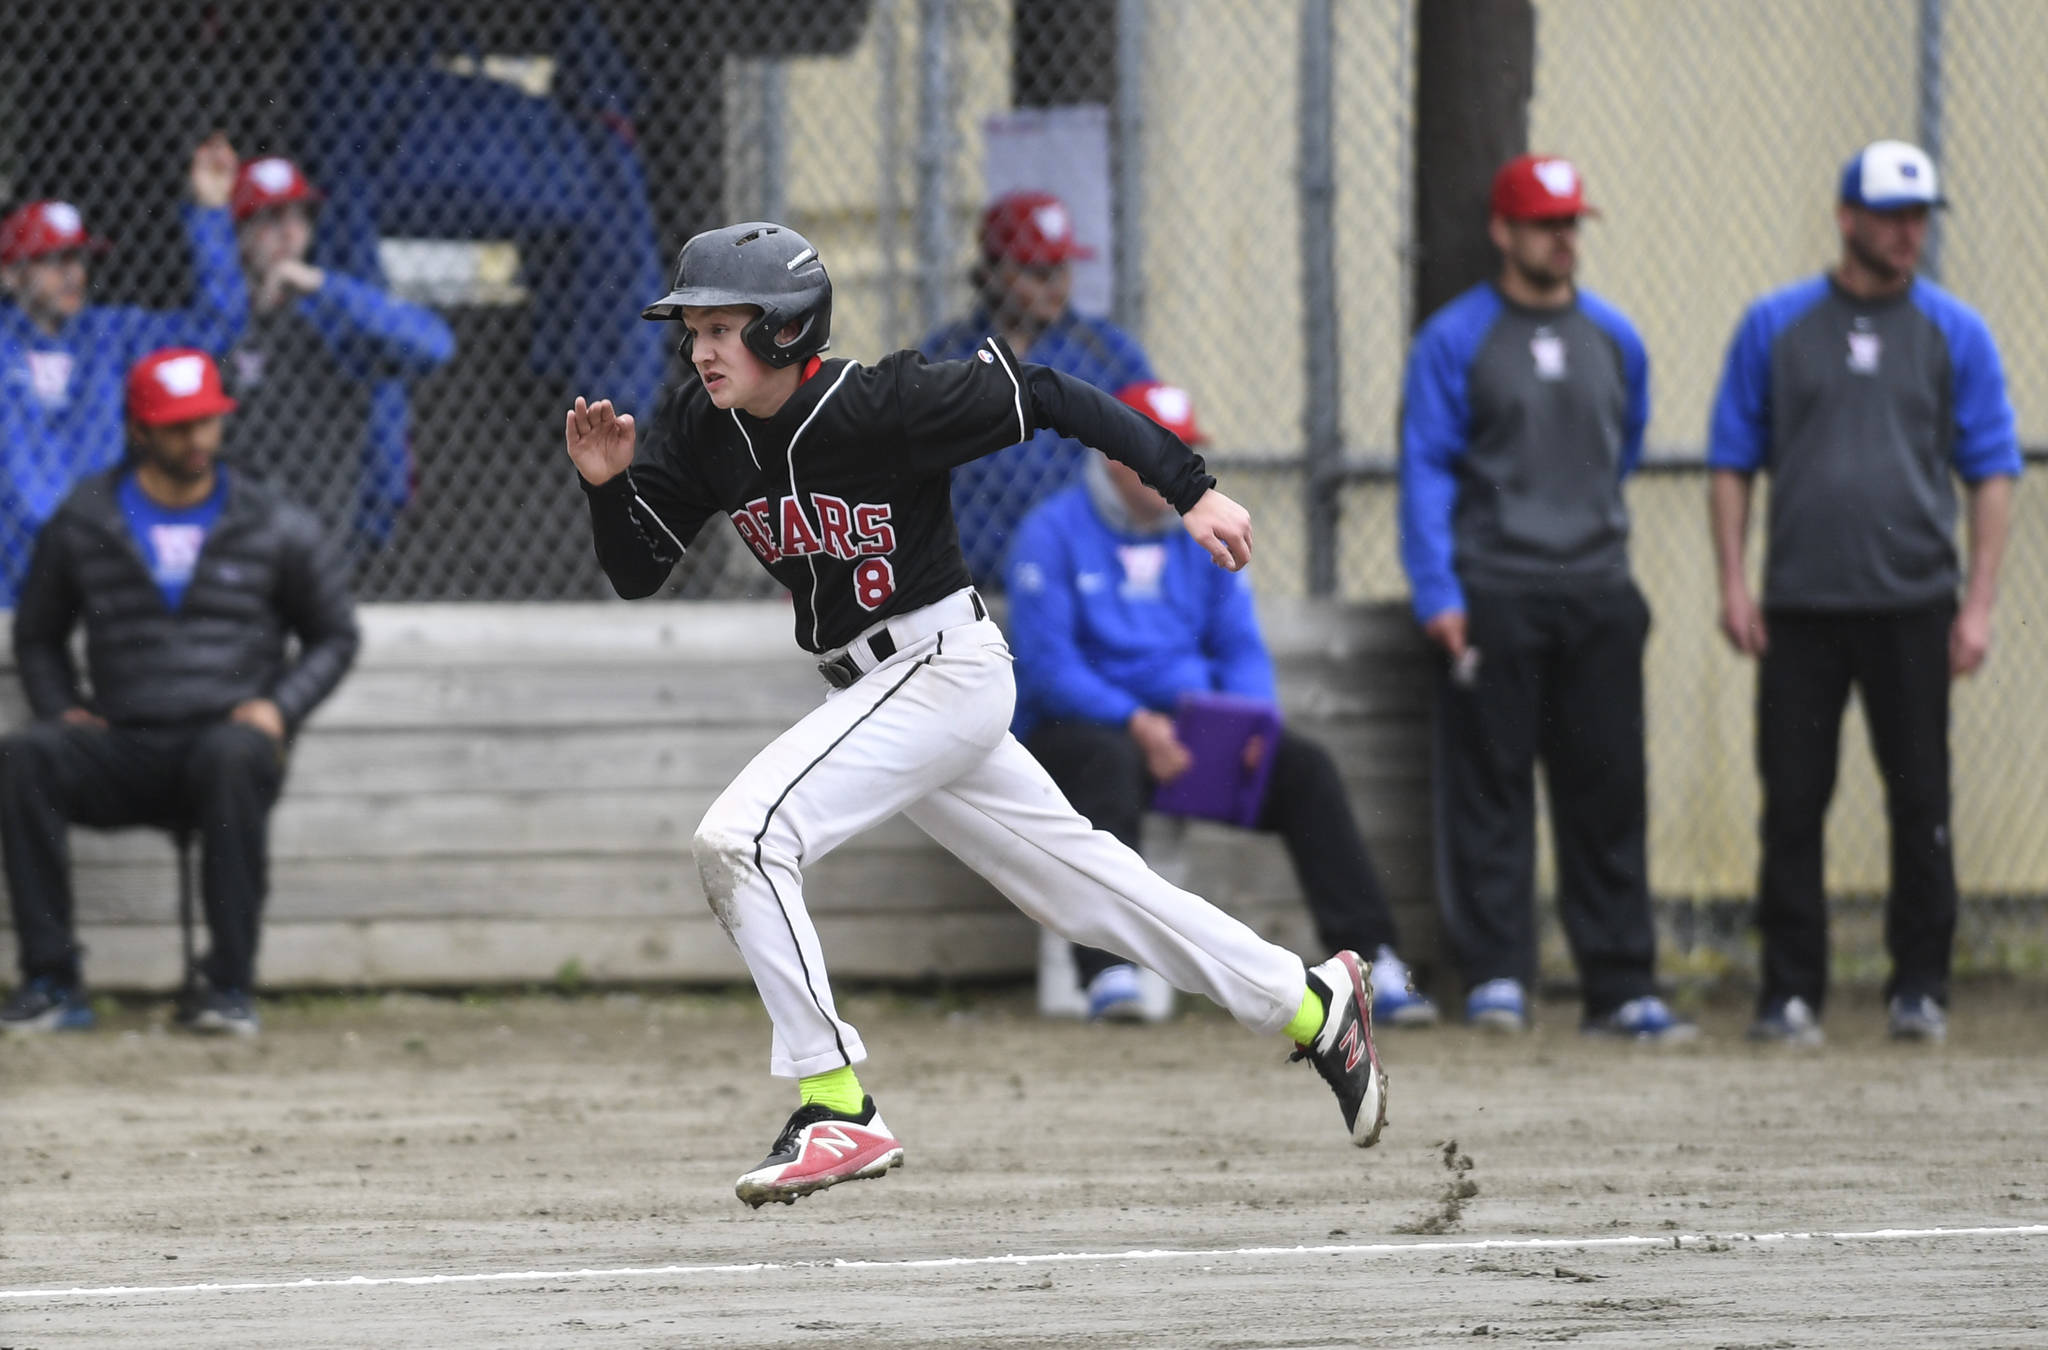 Photos: First day of the Region V Baseball Championships